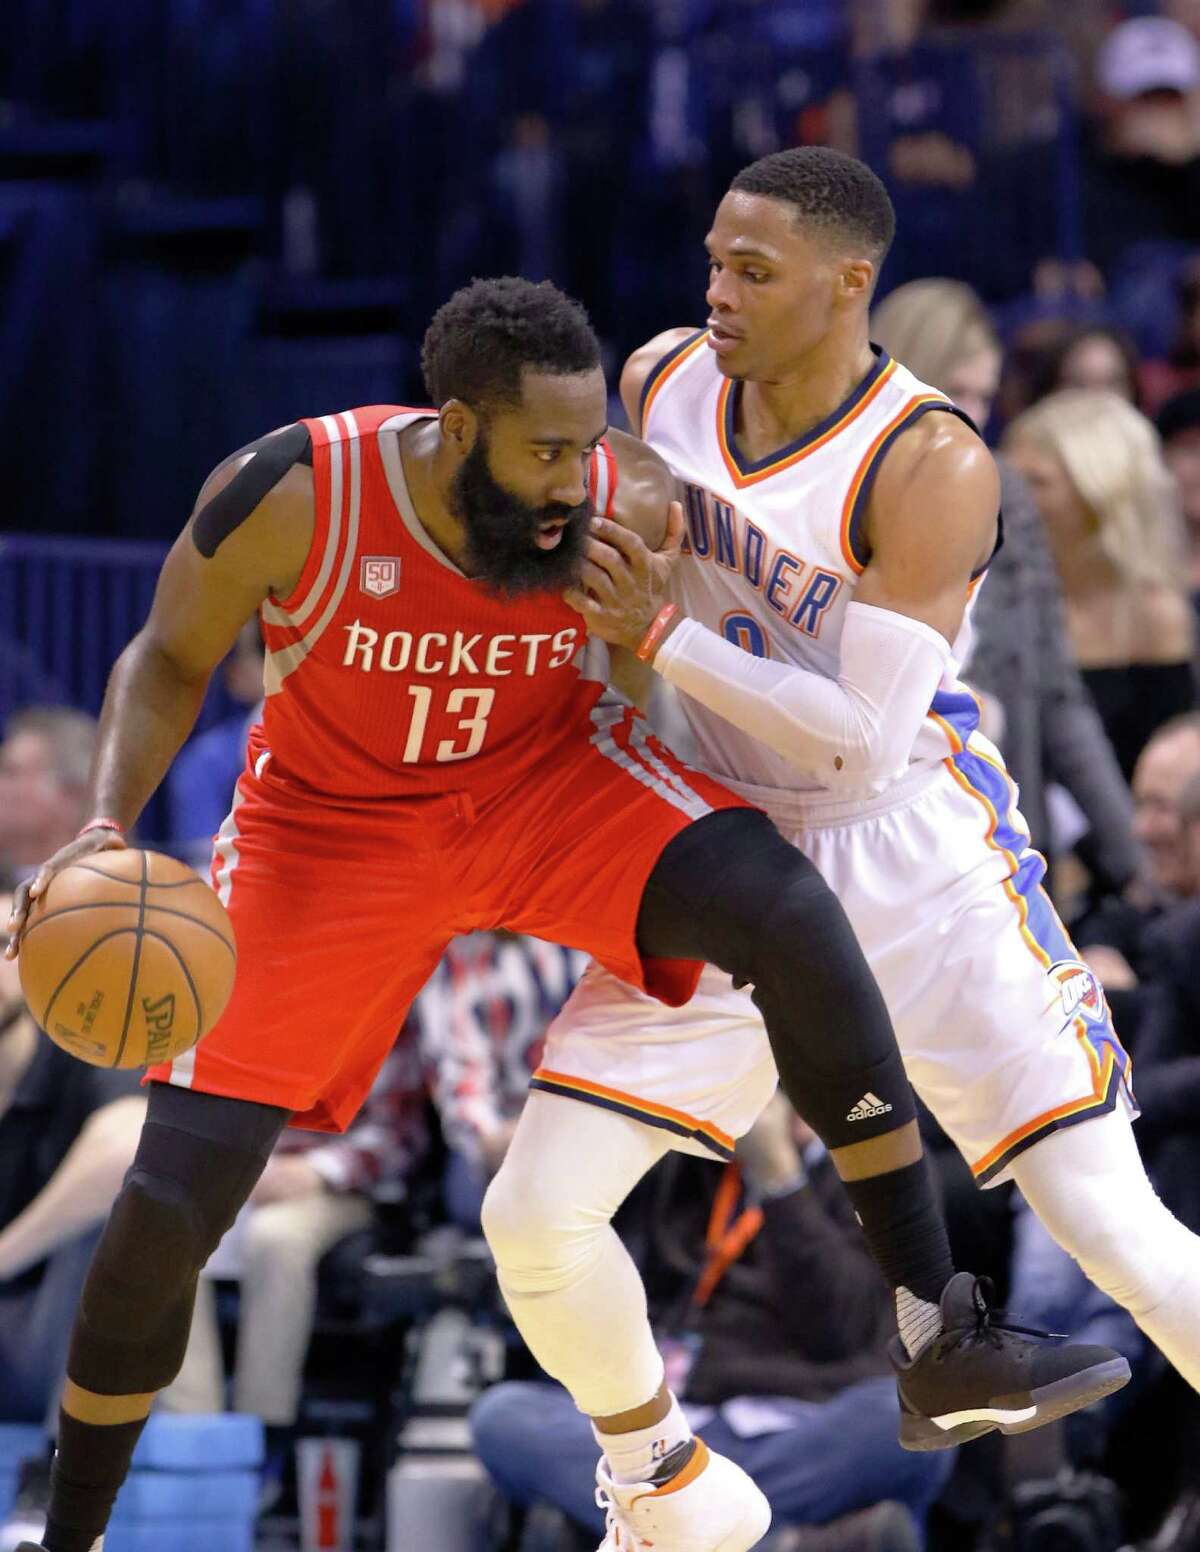 Houston Rockets guard James Harden (13) is defended by Oklahoma City Thunder guard Russell Westbrook (0) on a drive to the basket during the second half of an NBA basketball game in Oklahoma City, Friday, Dec. 9, 2016. Houston won 102-99. (AP Photo/Alonzo Adams)